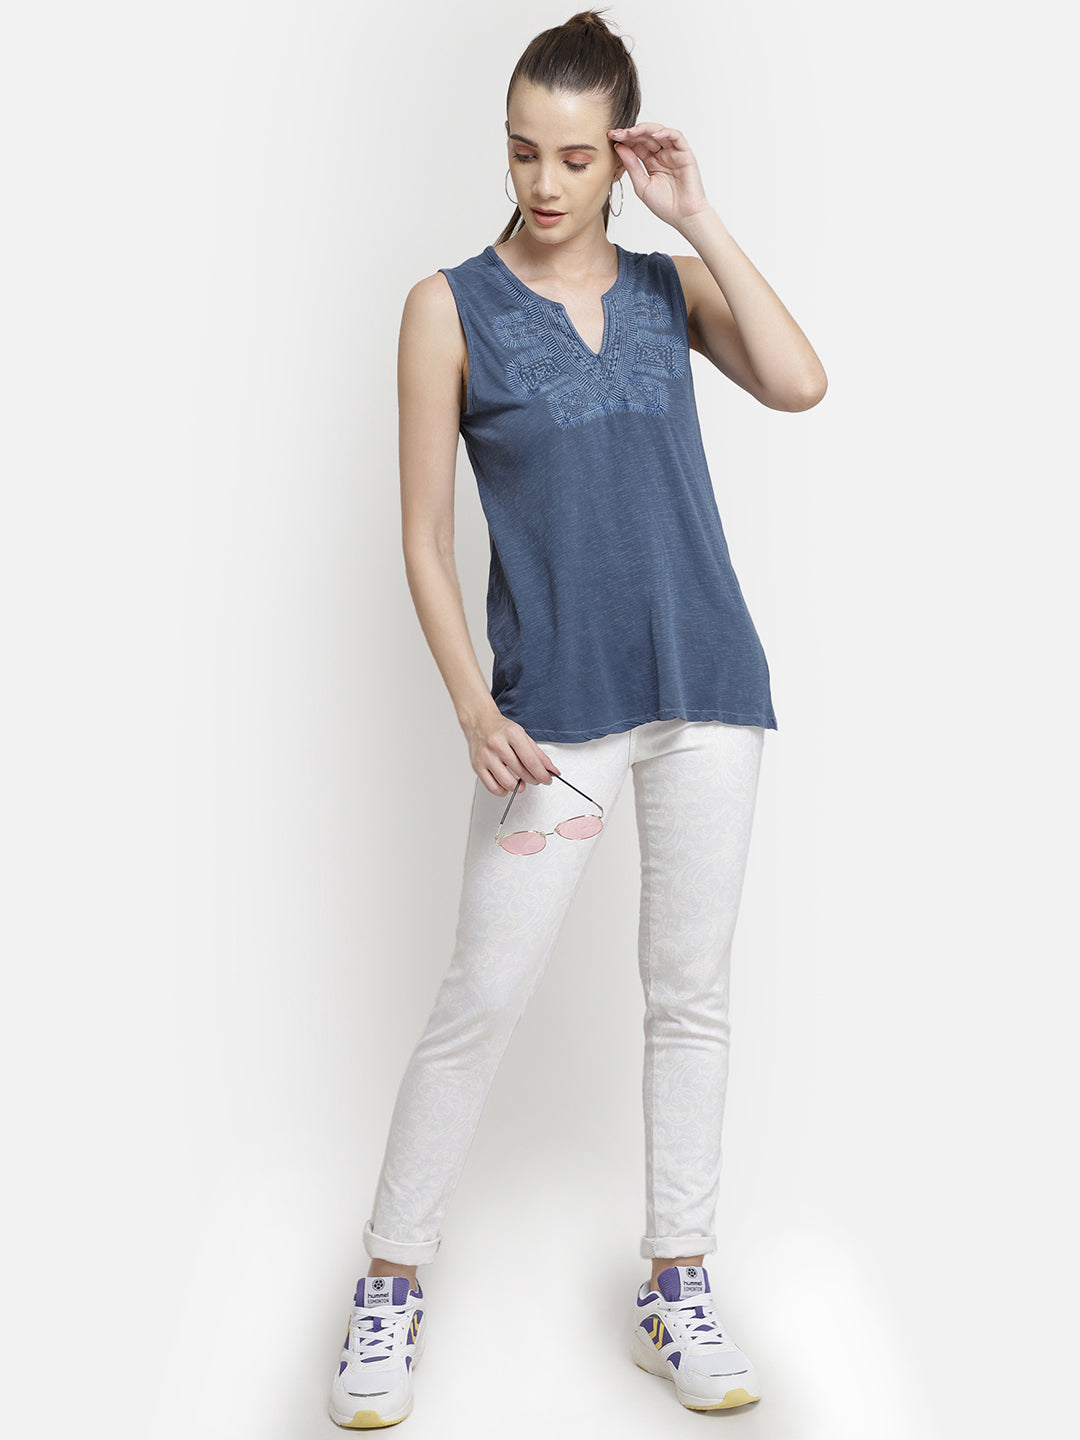 Blue Embroidered viscose knit casual top